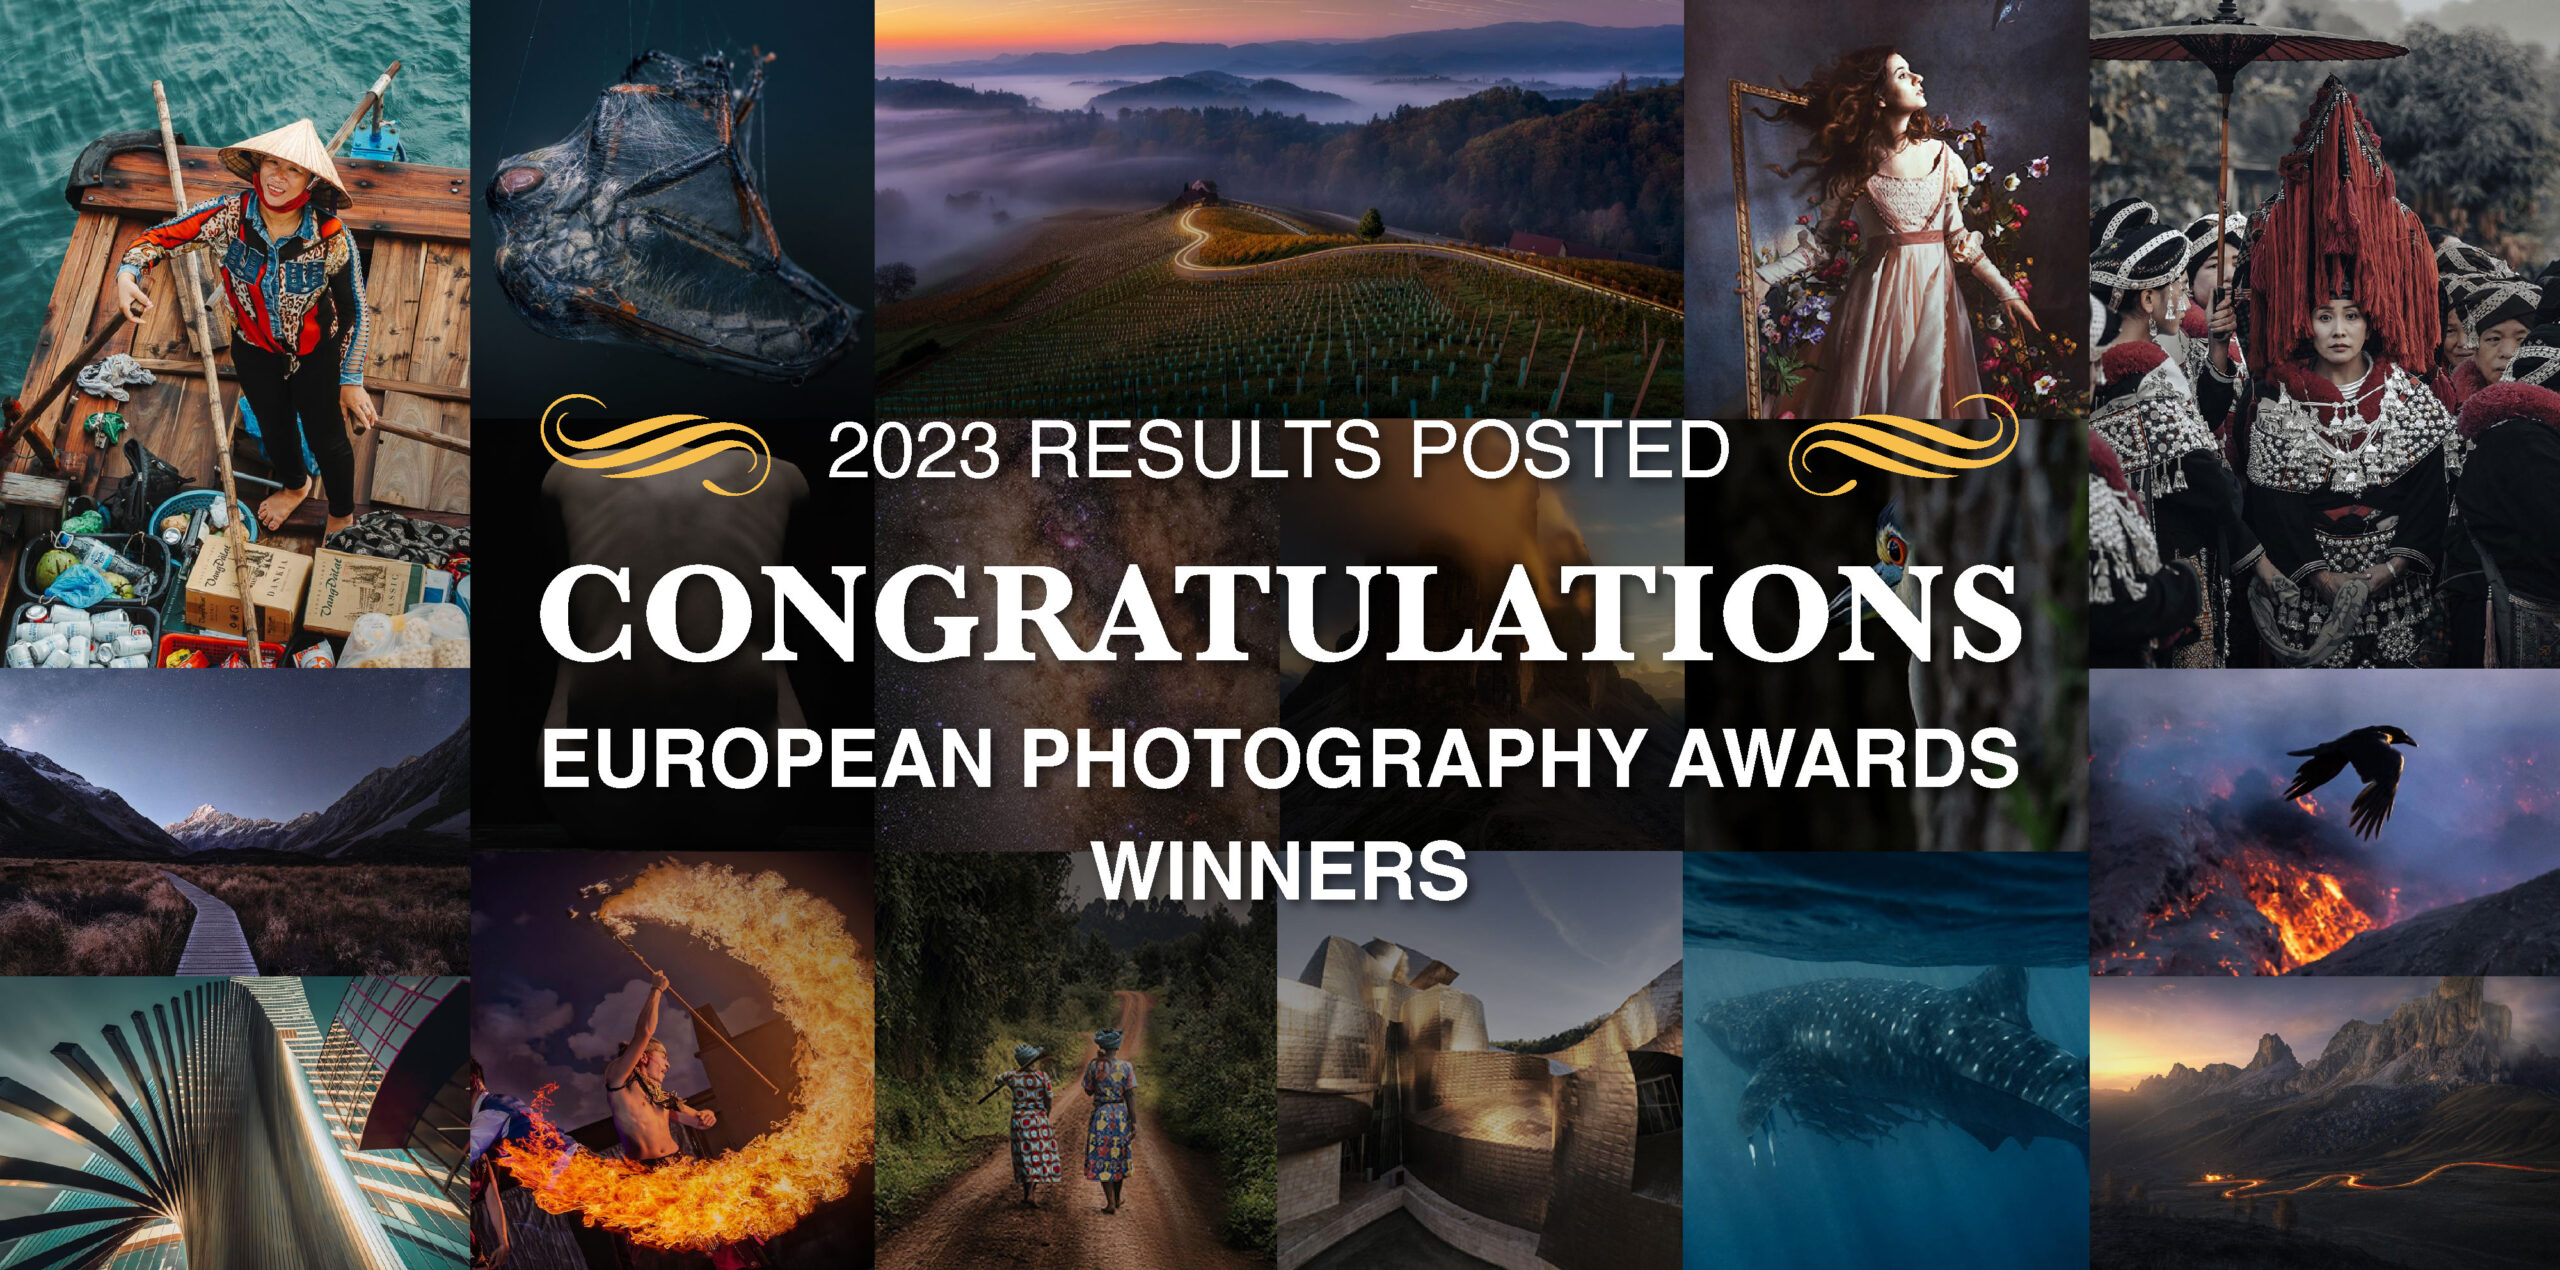 2023 European Photography Awards Announced Esteemed Winners in Global Contest